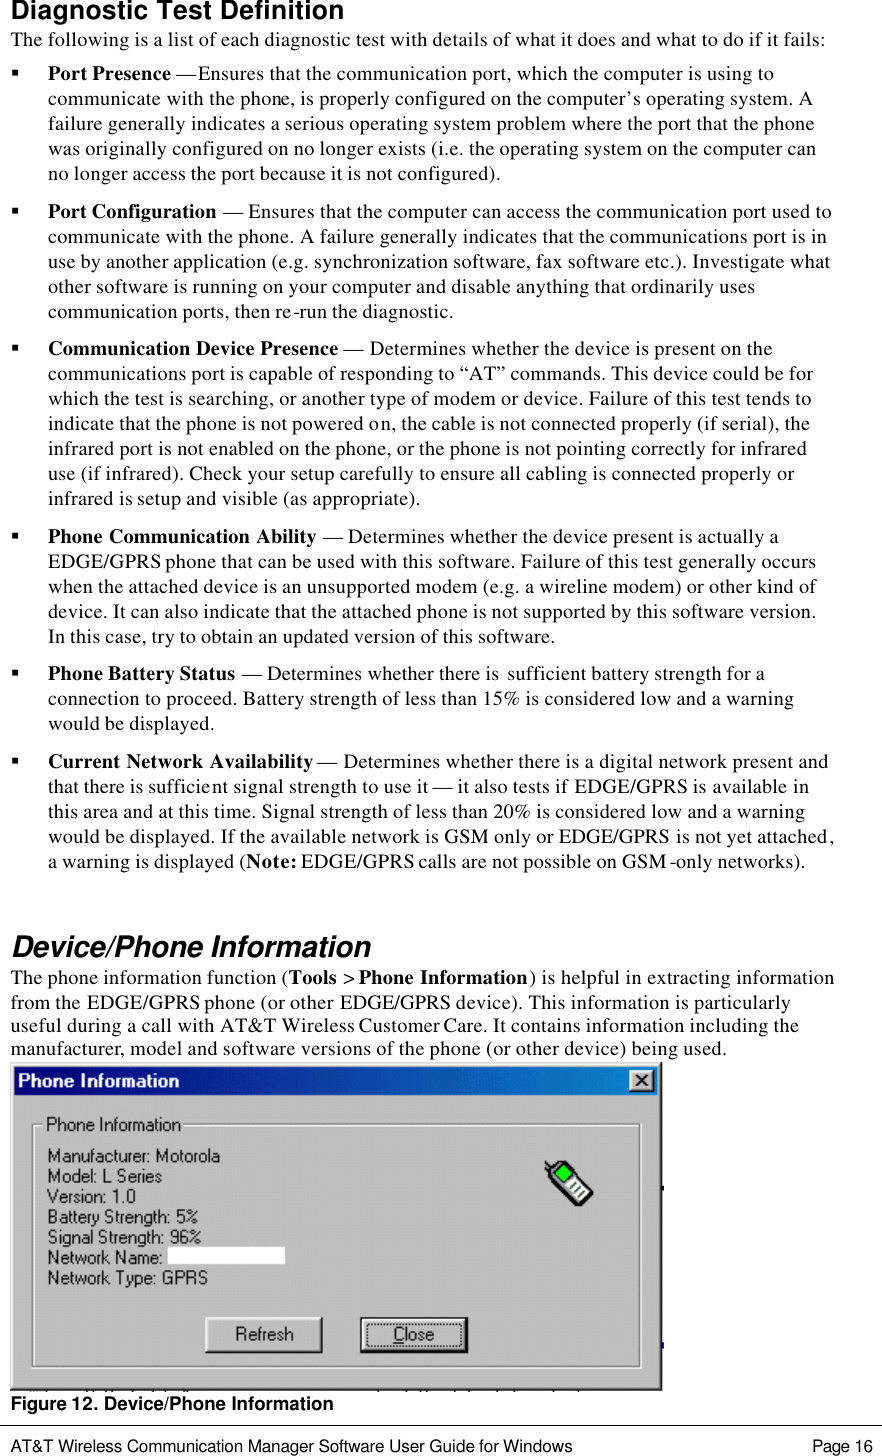   AT&amp;T Wireless Communication Manager Software User Guide for Windows    Page 16  Diagnostic Test Definition The following is a list of each diagnostic test with details of what it does and what to do if it fails: § Port Presence —Ensures that the communication port, which the computer is using to communicate with the phone, is properly configured on the computer’s operating system. A failure generally indicates a serious operating system problem where the port that the phone was originally configured on no longer exists (i.e. the operating system on the computer can no longer access the port because it is not configured).  § Port Configuration — Ensures that the computer can access the communication port used to communicate with the phone. A failure generally indicates that the communications port is in use by another application (e.g. synchronization software, fax software etc.). Investigate what other software is running on your computer and disable anything that ordinarily uses communication ports, then re-run the diagnostic.  § Communication Device Presence — Determines whether the device is present on the communications port is capable of responding to “AT” commands. This device could be for which the test is searching, or another type of modem or device. Failure of this test tends to indicate that the phone is not powered on, the cable is not connected properly (if serial), the infrared port is not enabled on the phone, or the phone is not pointing correctly for infrared use (if infrared). Check your setup carefully to ensure all cabling is connected properly or infrared is setup and visible (as appropriate).  § Phone Communication Ability — Determines whether the device present is actually a EDGE/GPRS phone that can be used with this software. Failure of this test generally occurs when the attached device is an unsupported modem (e.g. a wireline modem) or other kind of device. It can also indicate that the attached phone is not supported by this software version. In this case, try to obtain an updated version of this software.  § Phone Battery Status — Determines whether there is  sufficient battery strength for a connection to proceed. Battery strength of less than 15% is considered low and a warning would be displayed.  § Current Network Availability — Determines whether there is a digital network present and that there is sufficient signal strength to use it — it also tests if EDGE/GPRS is available in this area and at this time. Signal strength of less than 20% is considered low and a warning would be displayed. If the available network is GSM only or EDGE/GPRS is not yet attached, a warning is displayed (Note: EDGE/GPRS calls are not possible on GSM-only networks).  Device/Phone Information The phone information function (Tools &gt; Phone Information) is helpful in extracting information from the EDGE/GPRS phone (or other EDGE/GPRS device). This information is particularly useful during a call with AT&amp;T Wireless Customer Care. It contains information including the manufacturer, model and software versions of the phone (or other device) being used.  Figure 12. Device/Phone Information 